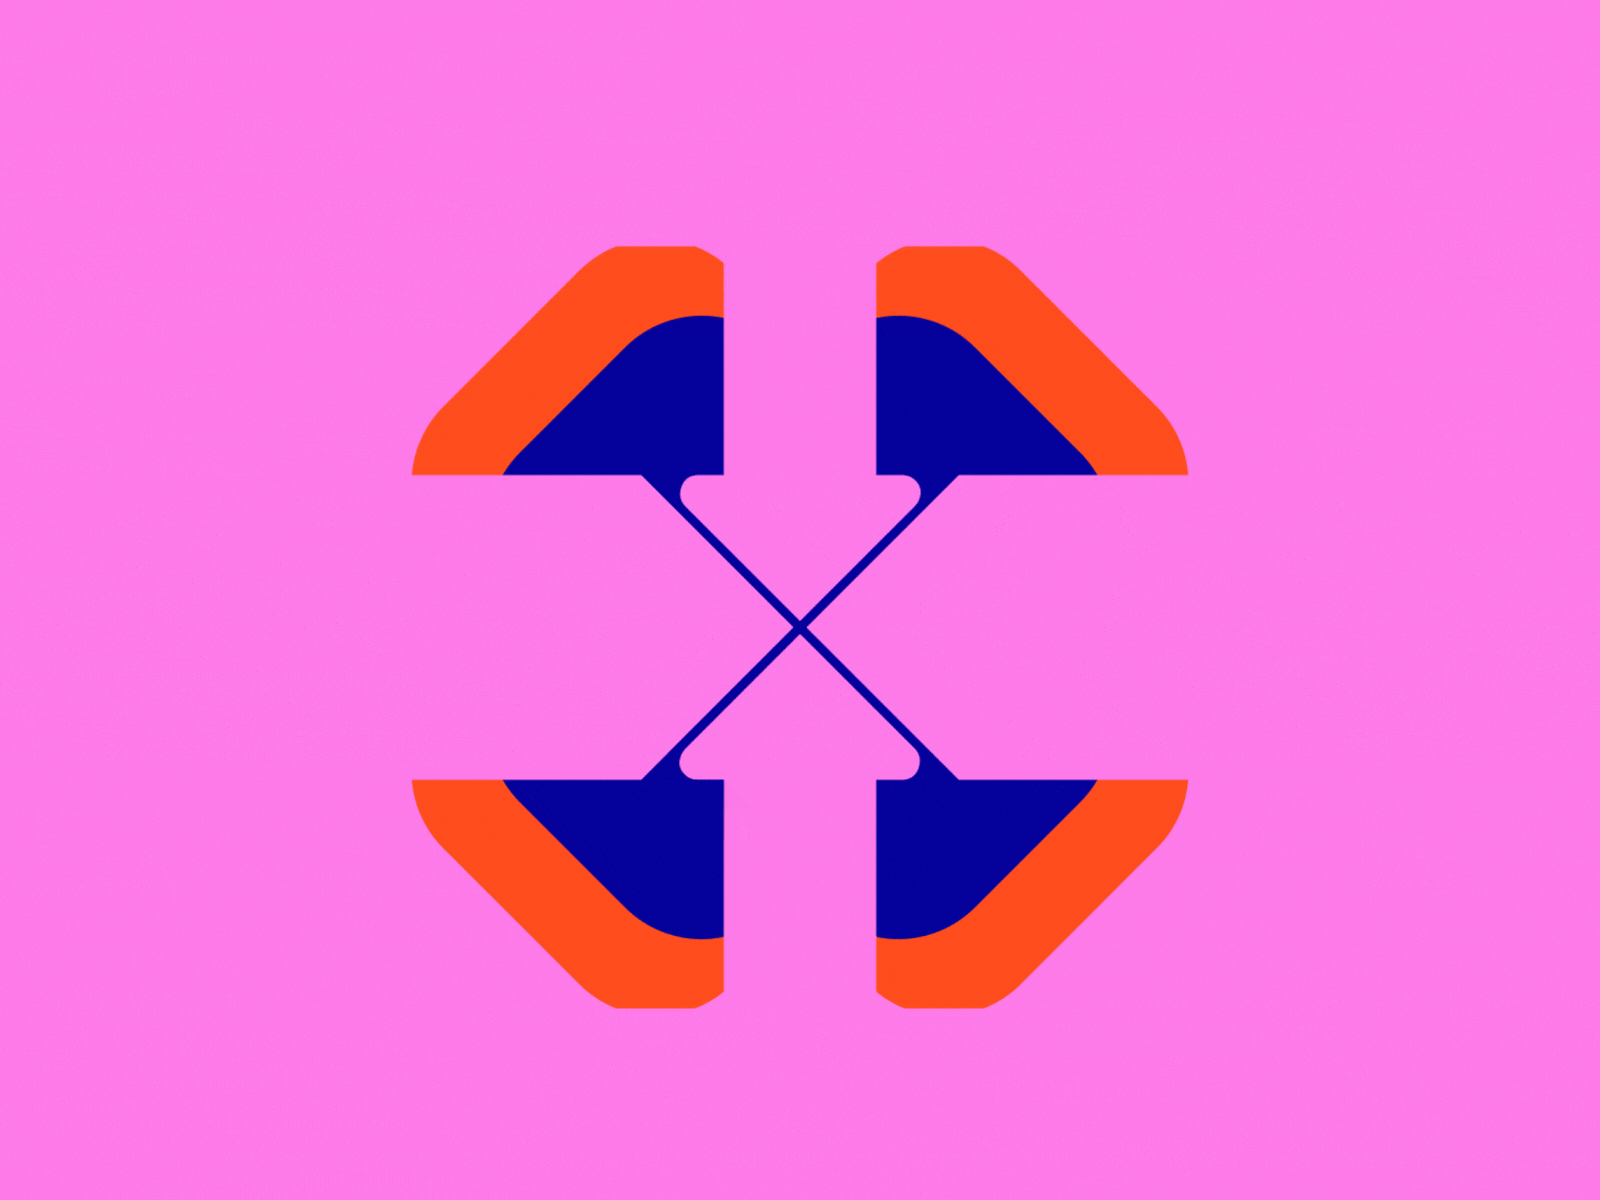 36 Days of Type / X 36 days of type 36daysoftype 36daysoftype08 36dot ae after effects animated animated type animation animography colors design kinetic kinetic type motion motion design motion graphic motion graphics type typography